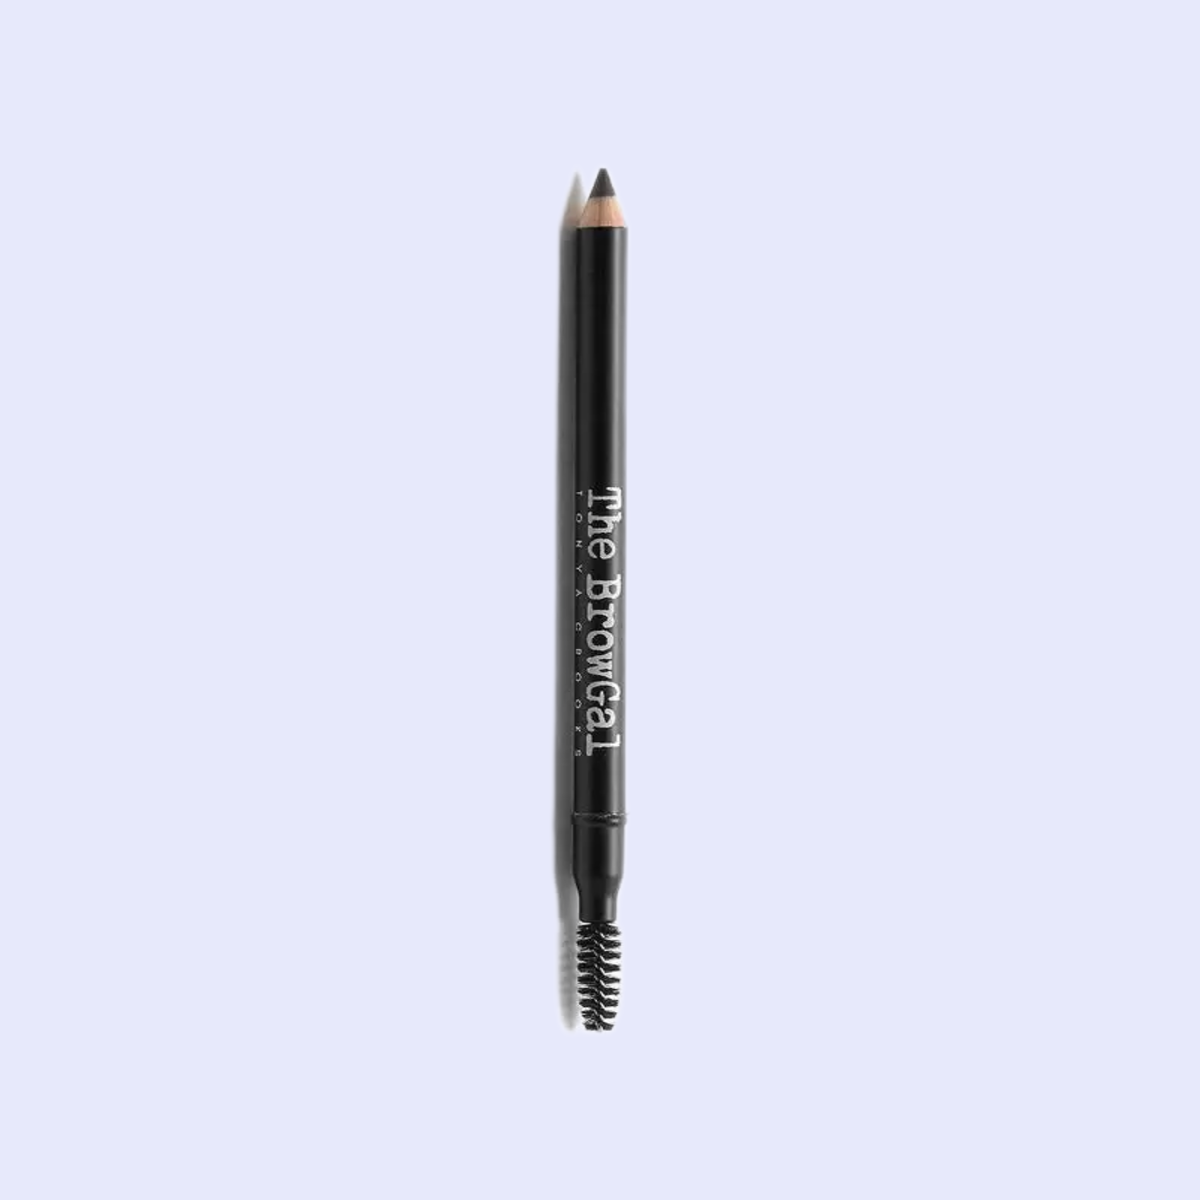 The BrowGal- Skinny Eyebrow Pencil 02 Expresso